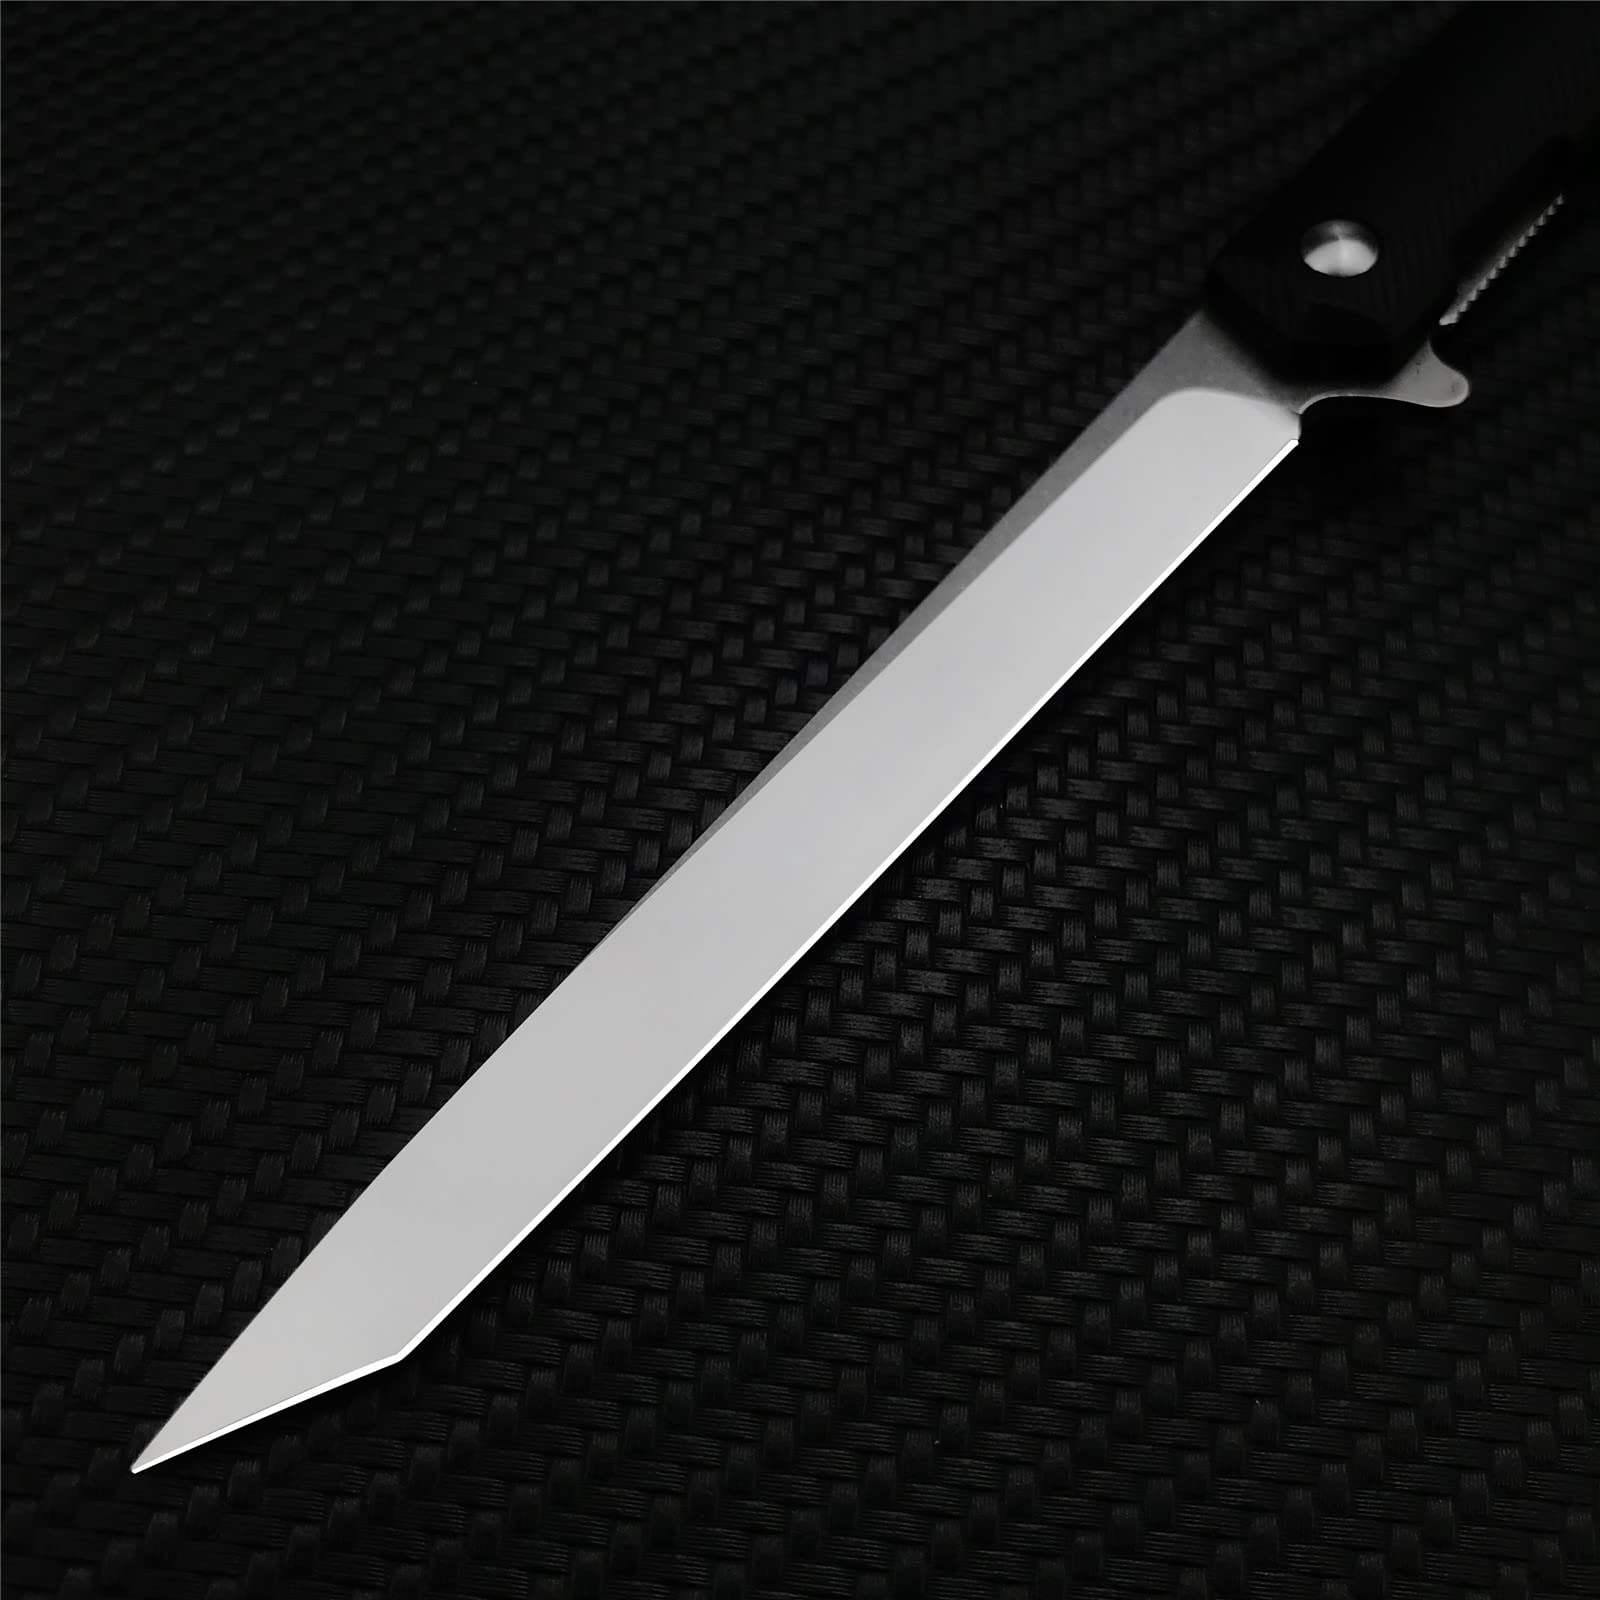 Edc Slim Small Flipper Folding Pocket Gentleman Knife For Men Ceo , Black Grivory Fiberglass Super Lightweight Handle And Liner Lock With Clip, 7Cr13Mov Plain Tanto Edge Blade, Outdoor Rescue Survival Everyday Carry Self Defense